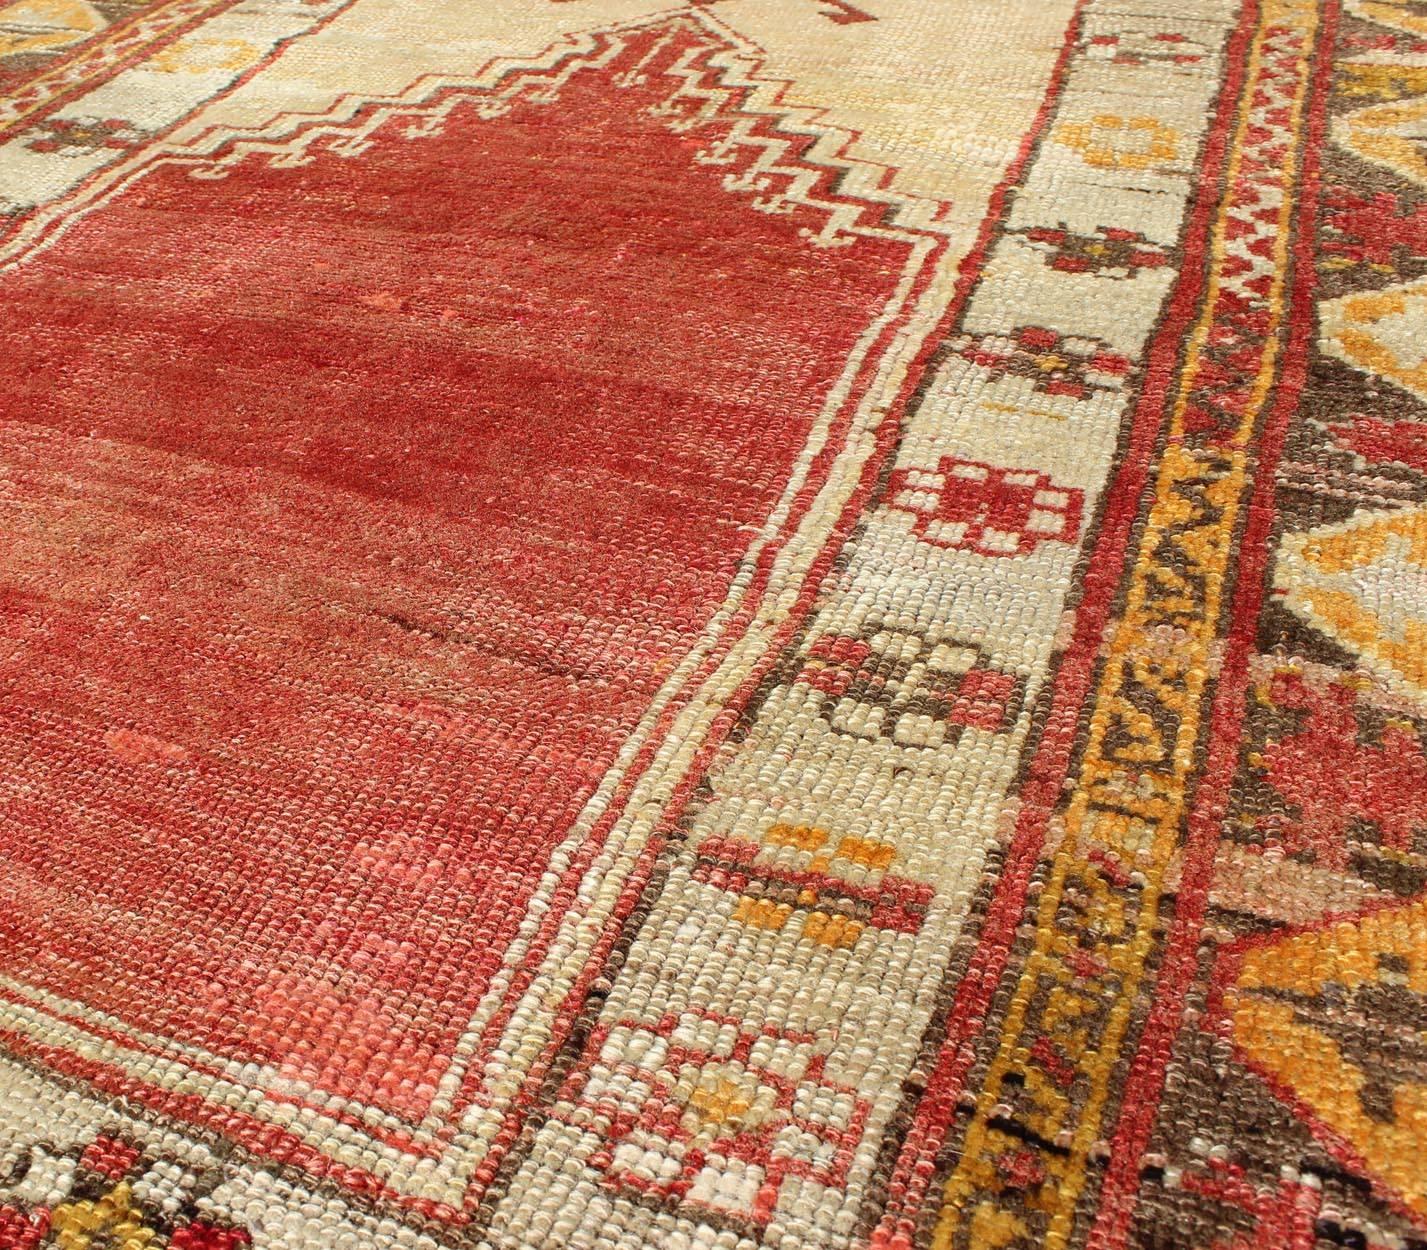 Early 20th Century 1920s Antique Turkish Oushak Prayer Rug in Red, Ivory, Orange, Cream and Brown